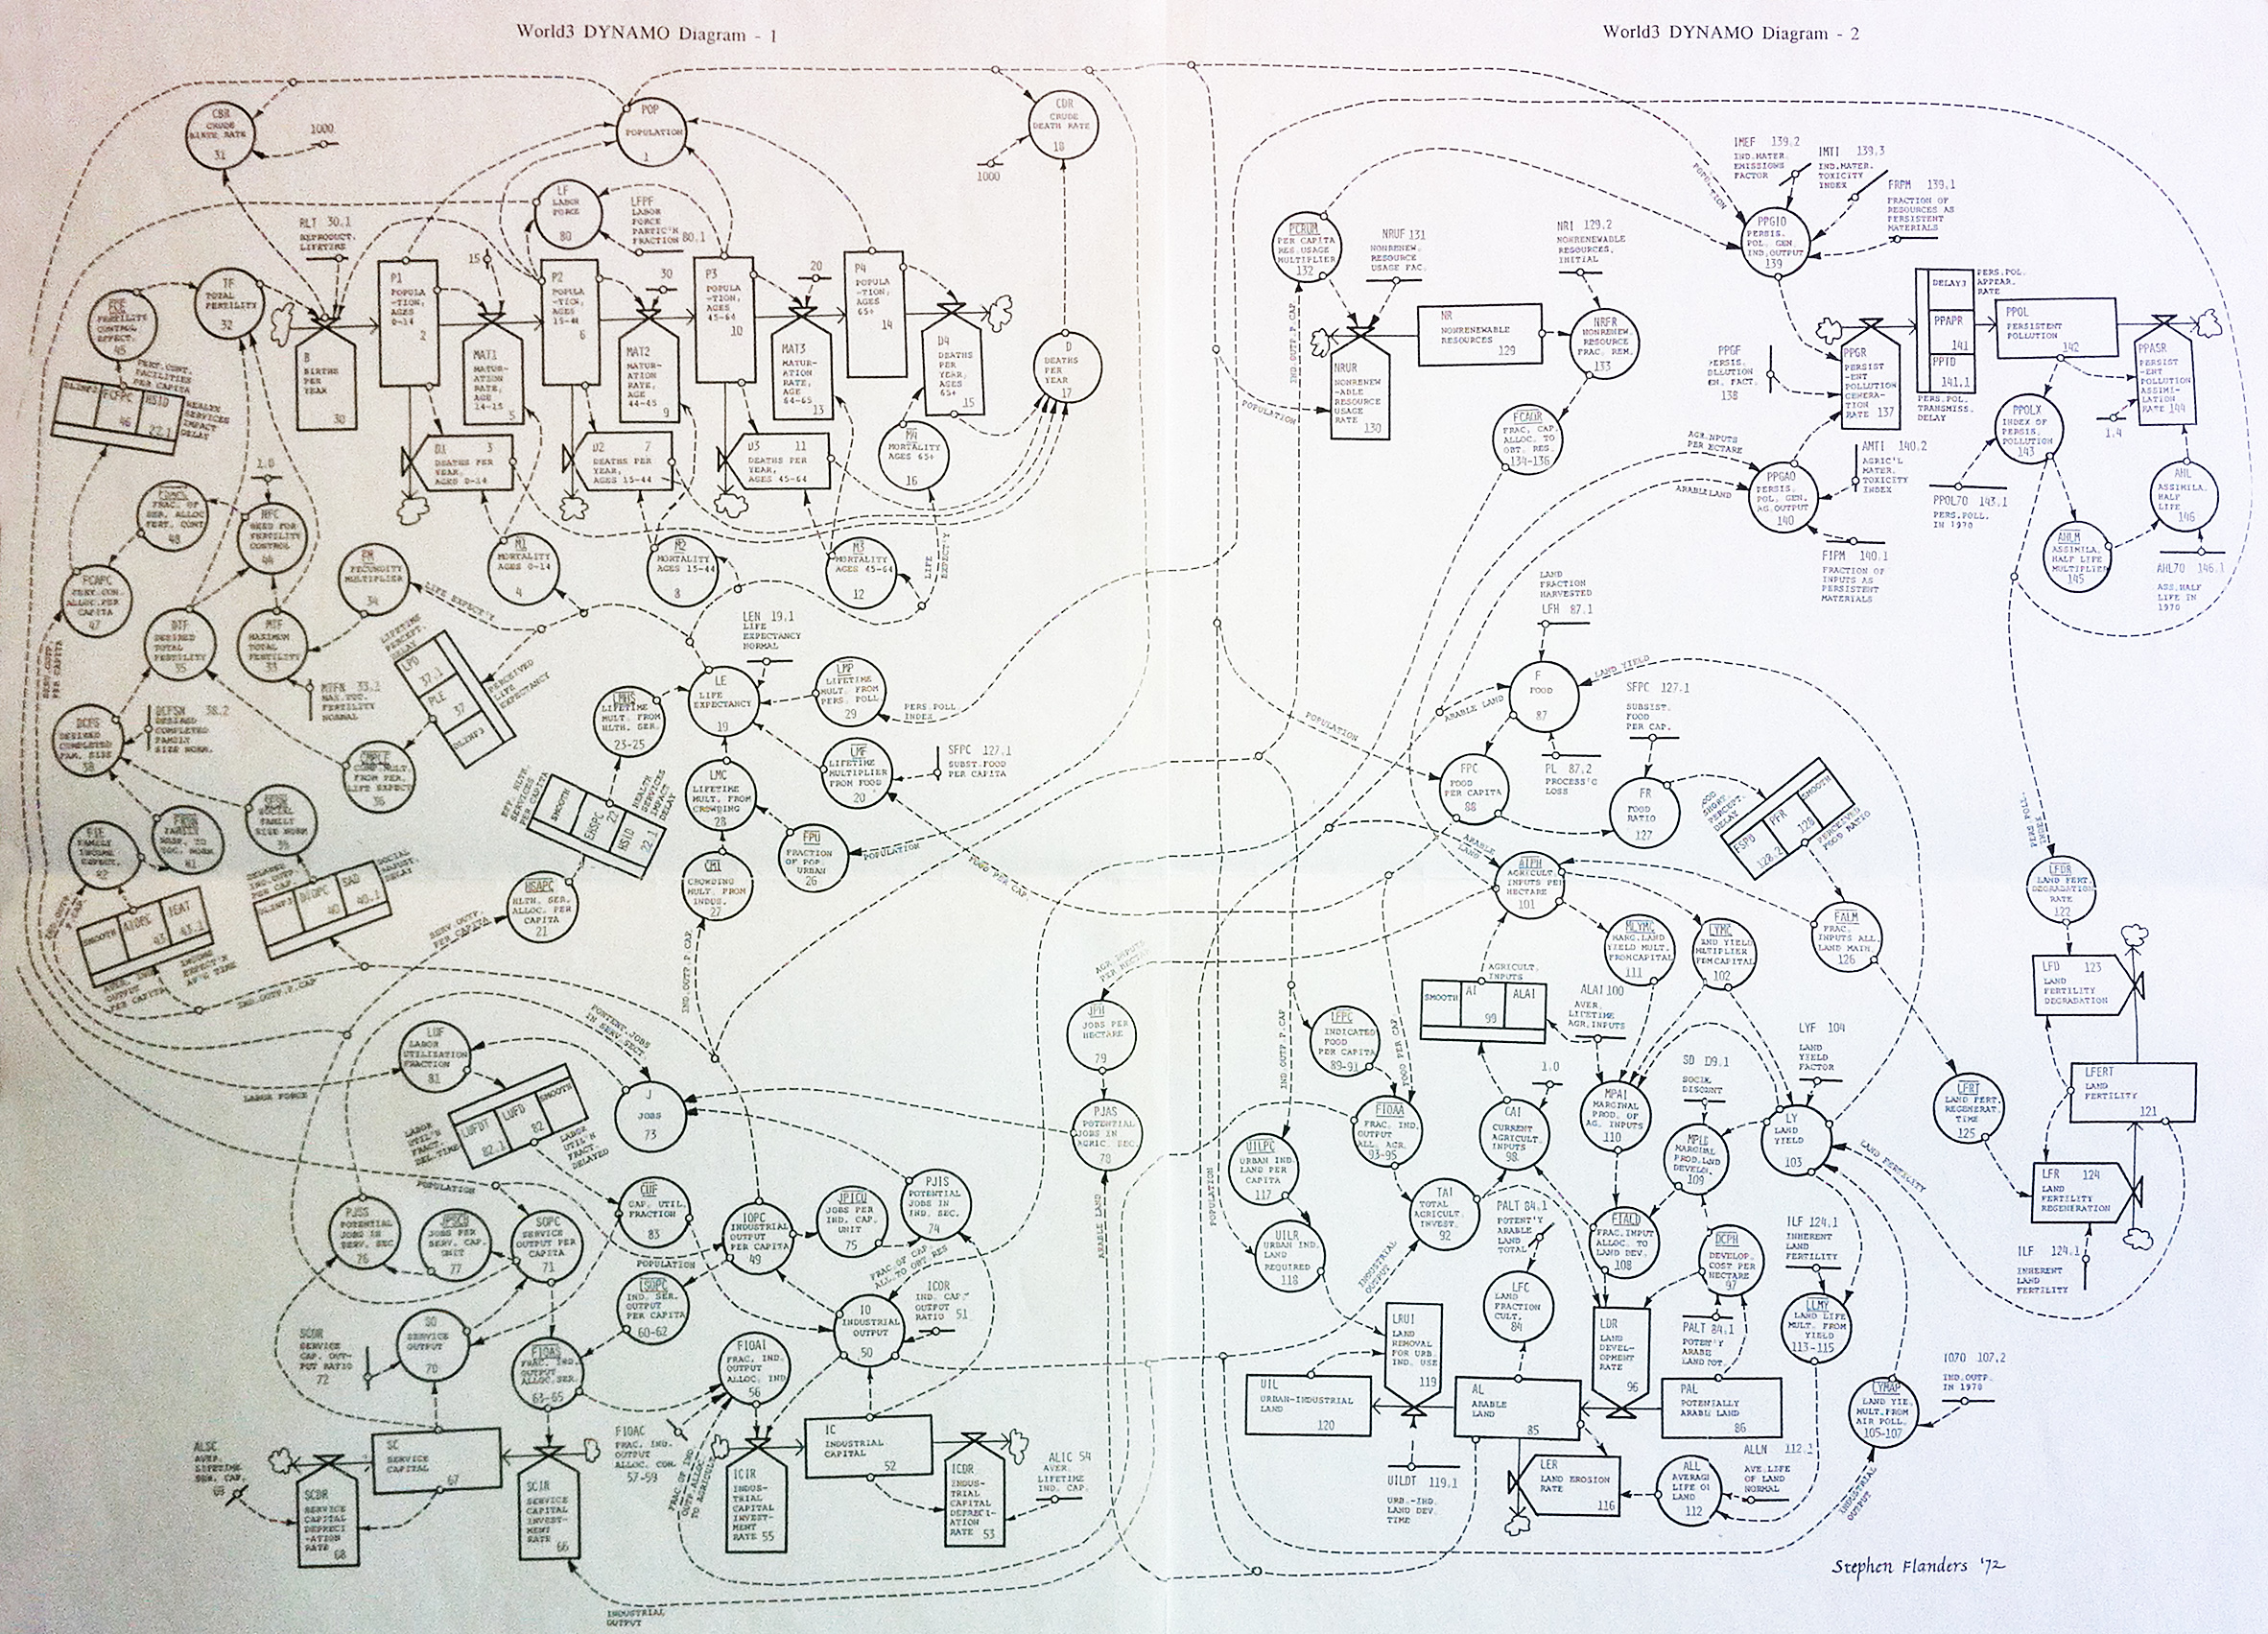 The plumbing and wiring diagram for the complete World3 model, drawn by Stephen Flanders in 1972.